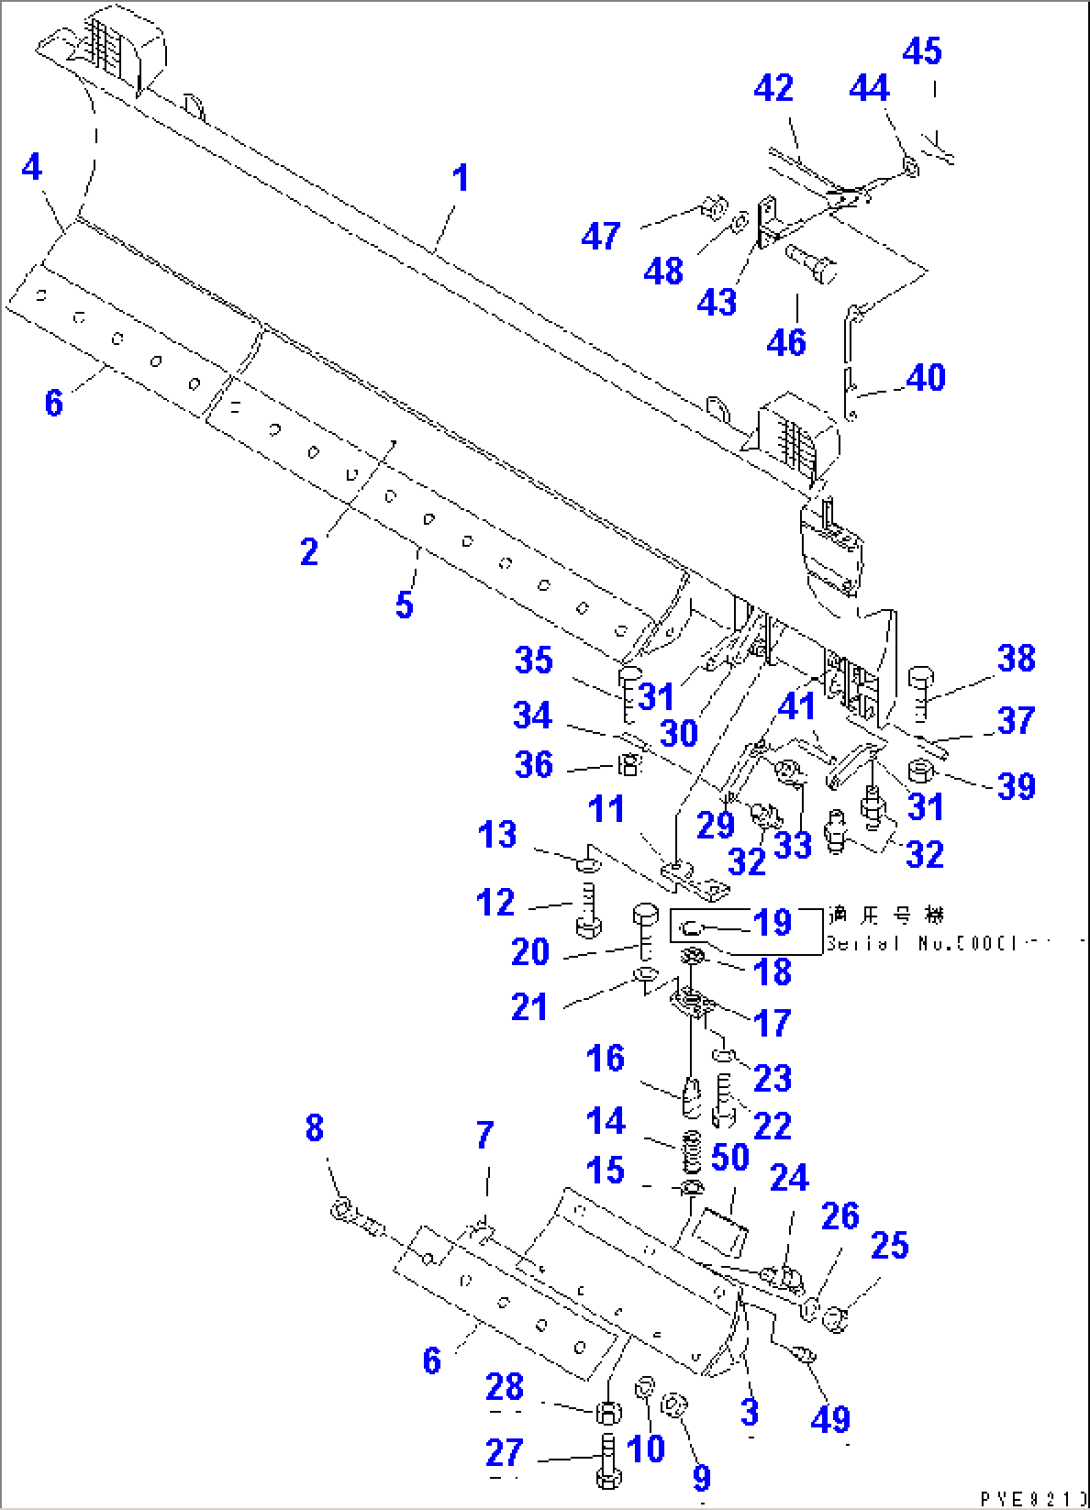 PITCH AND ANGLE SNOW PLOW (WITH SHOCK CANCEL BLADE) (1/3) (BLADE)(#50001-)